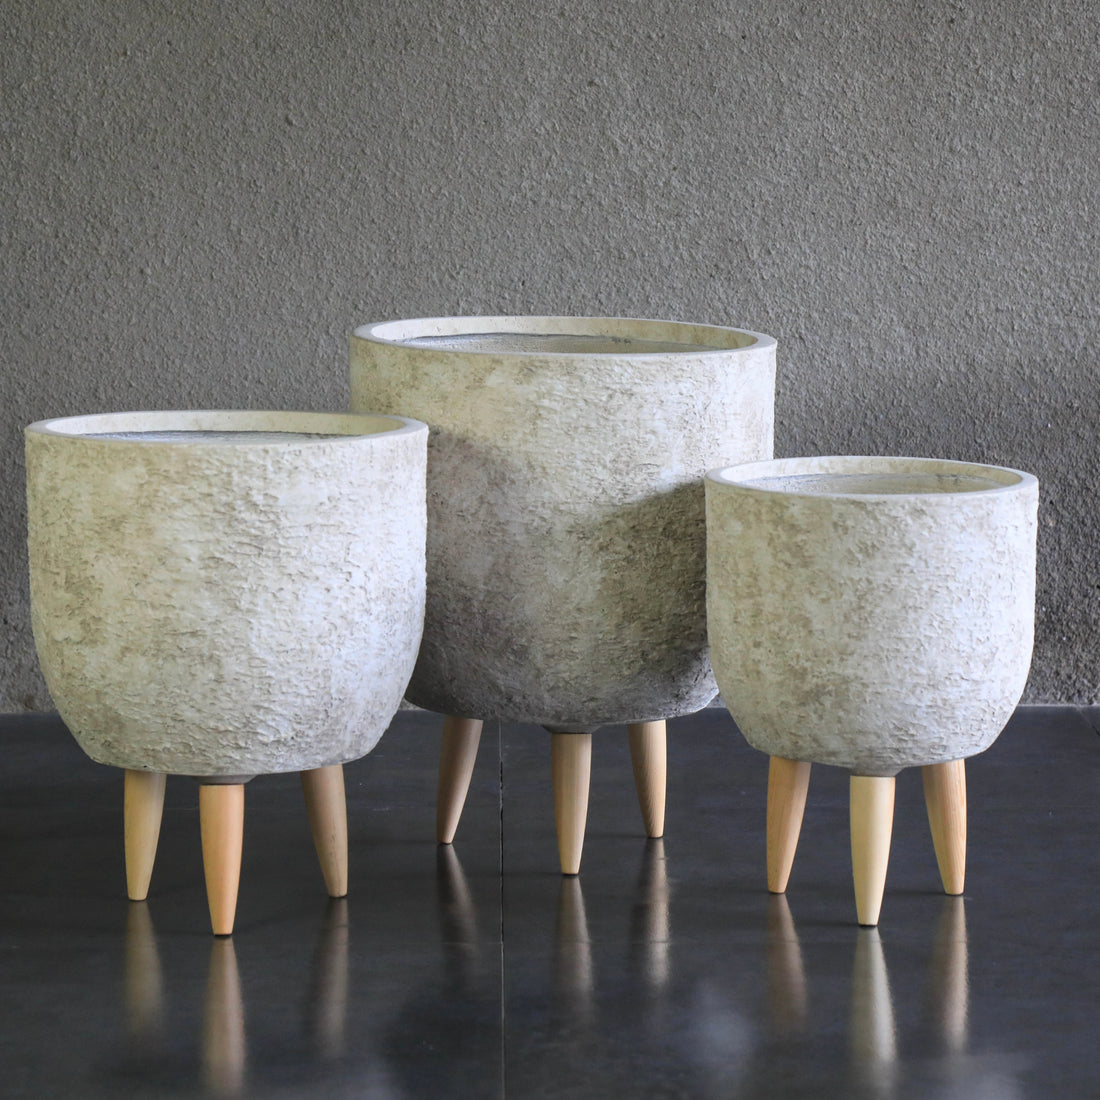 AGED STONE - Tall Indoor Fiber Cement Pot On Legs In  Aged Stone Texture - 02